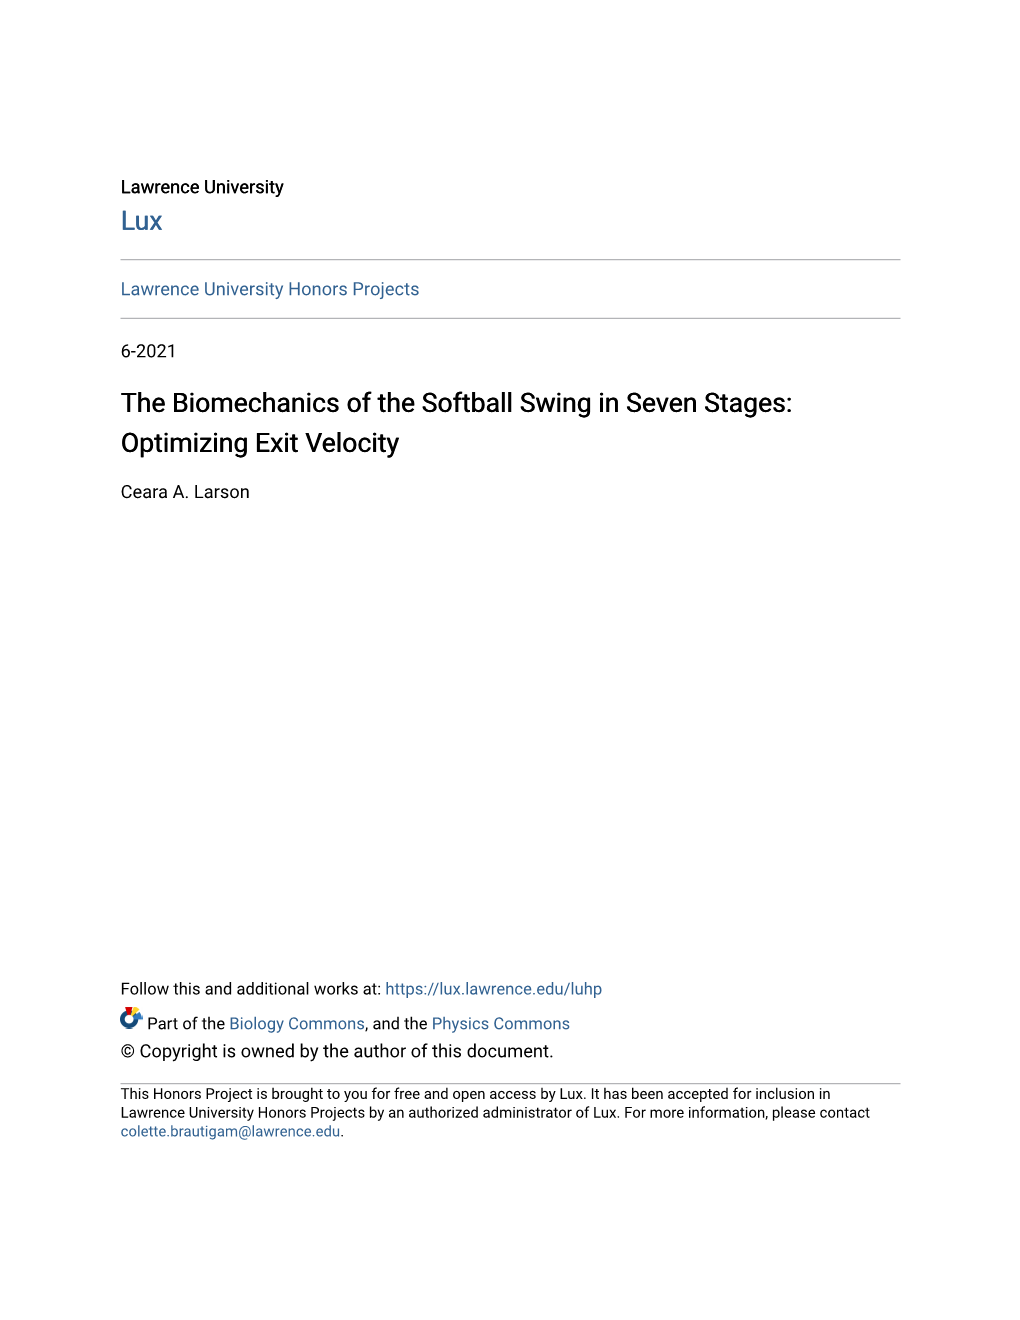 The Biomechanics of the Softball Swing in Seven Stages: Optimizing Exit Velocity